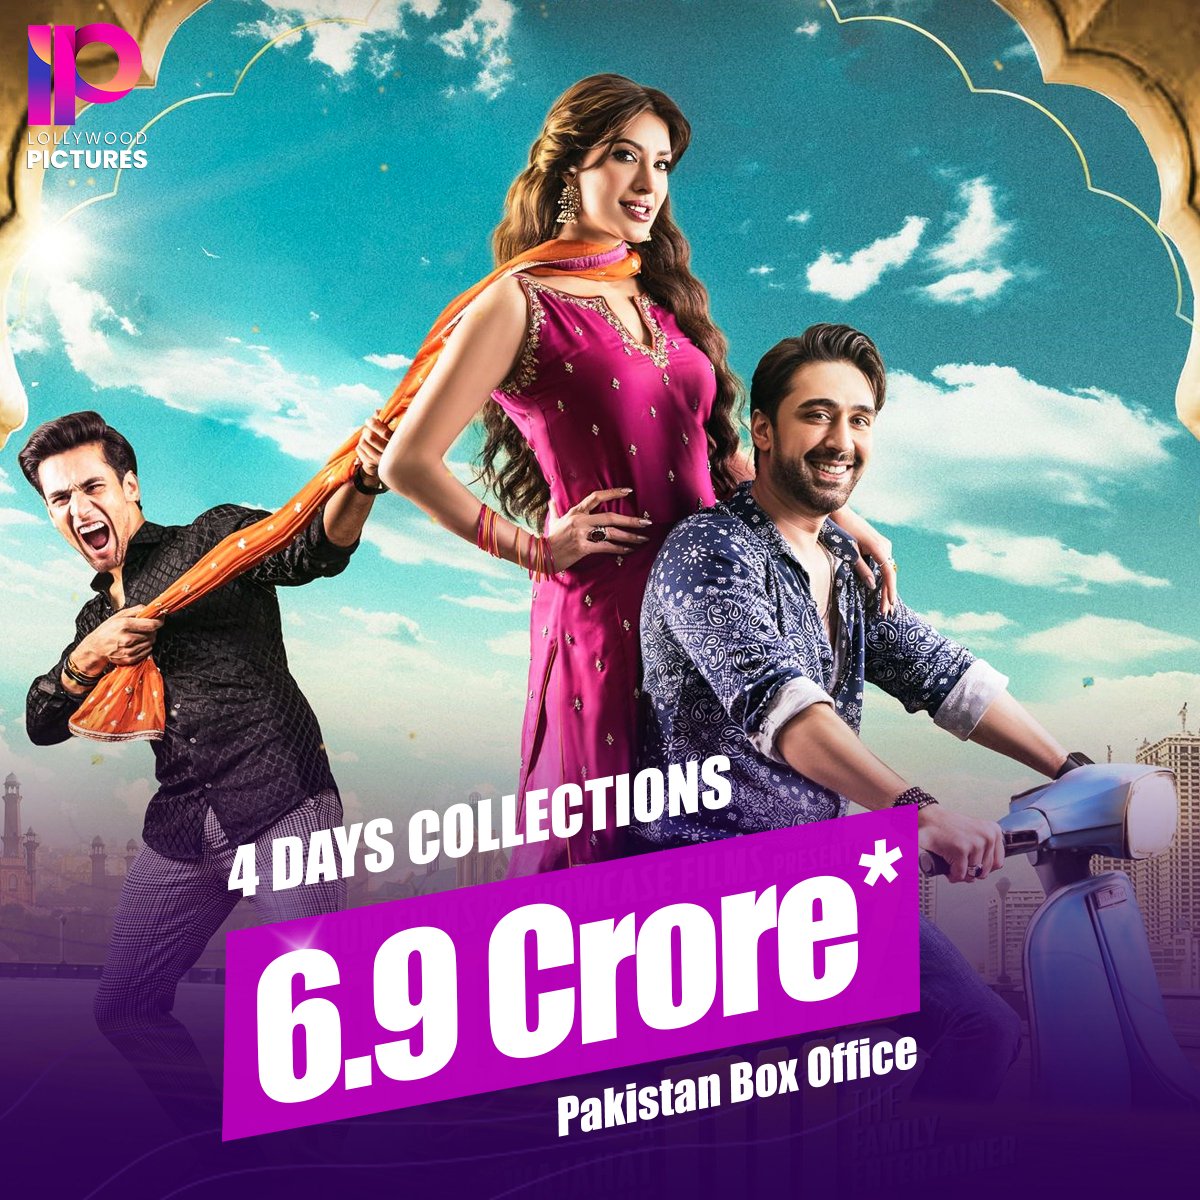 'Daghabaaz Dil' has done well, earning over 6.90 Crore at the box office on the fourth day of its release. Film surpassed is about to surpass 7 crore mark. #BoxOfficeCollection #DaghabaazDil #LollywoodPictures